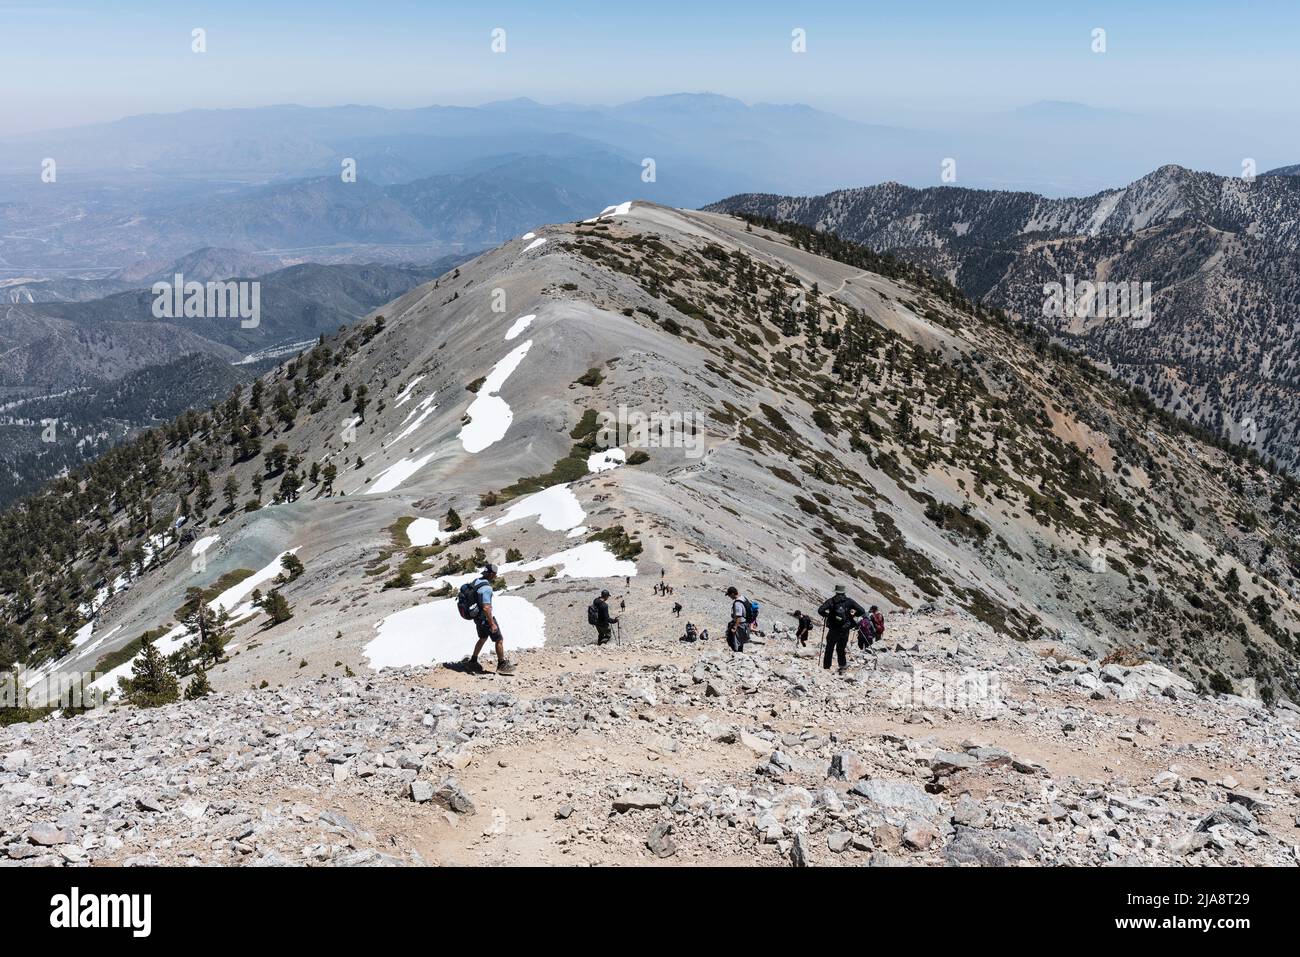 Mt Baldy, California, USA - May 22, 2022:  Hikers descending the Devils Backbone Trail on Mt Baldy in the San Gabriel Mountains near Los Angeles and O Stock Photo